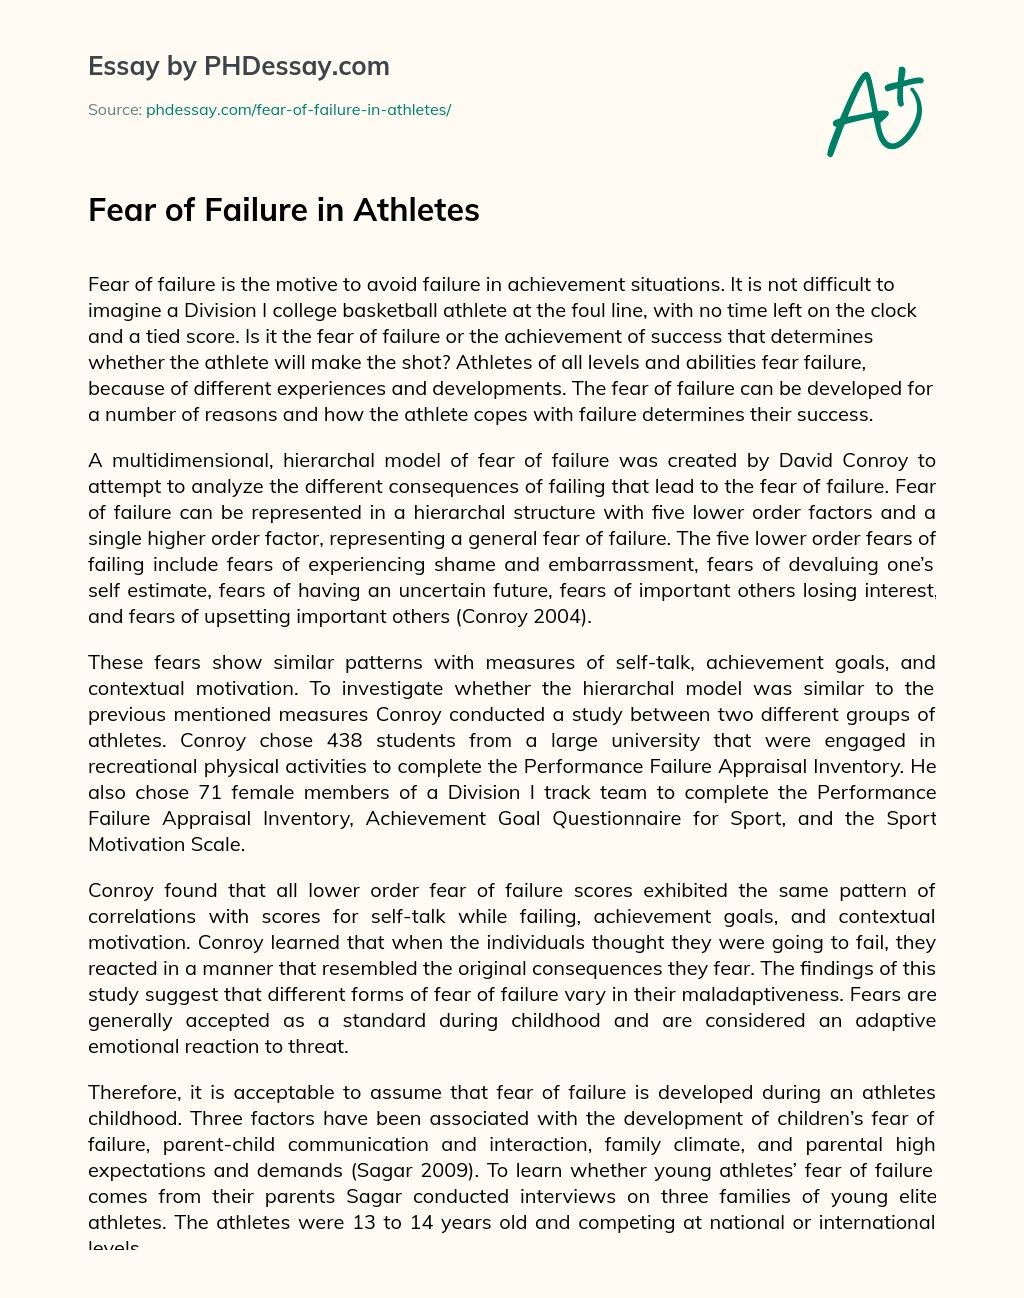 Fear of Failure in Athletes essay